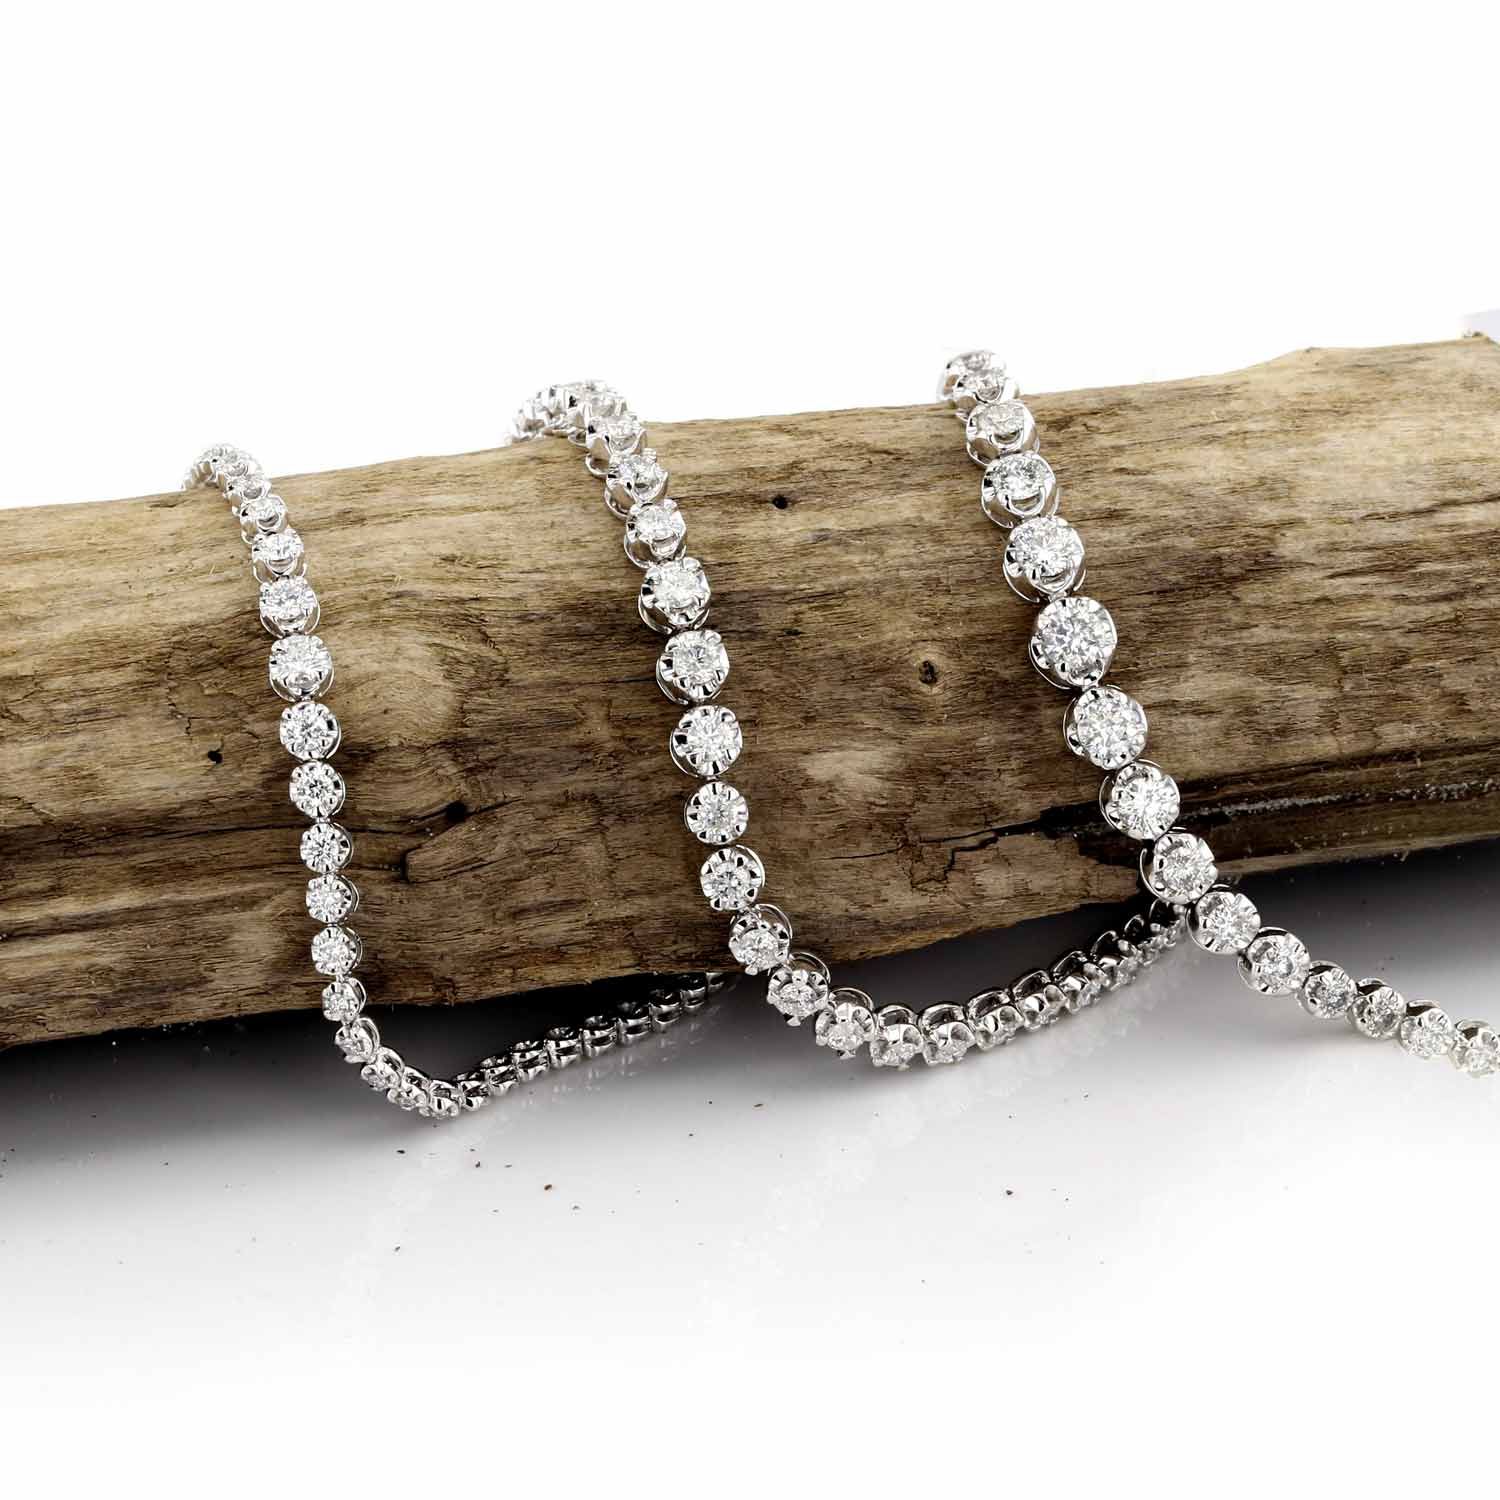 Three mirage style tennis bracelets on a piece of wood. Directs to shop tennis bracelets